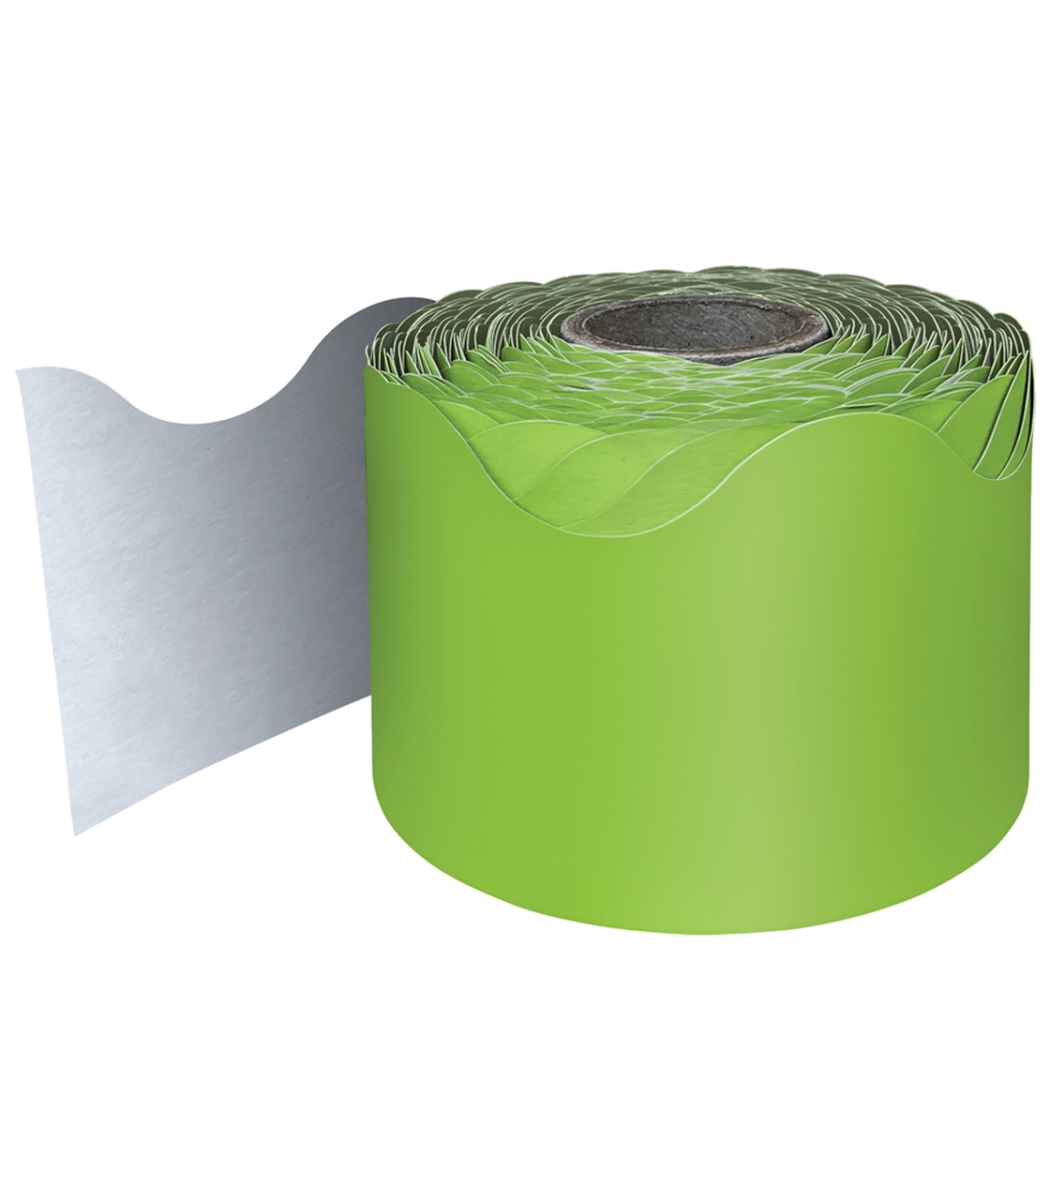 Picture of Carson Dellosa Education CD-108468-3 Rolled Scalloped Borders, Lime - 3 Roll